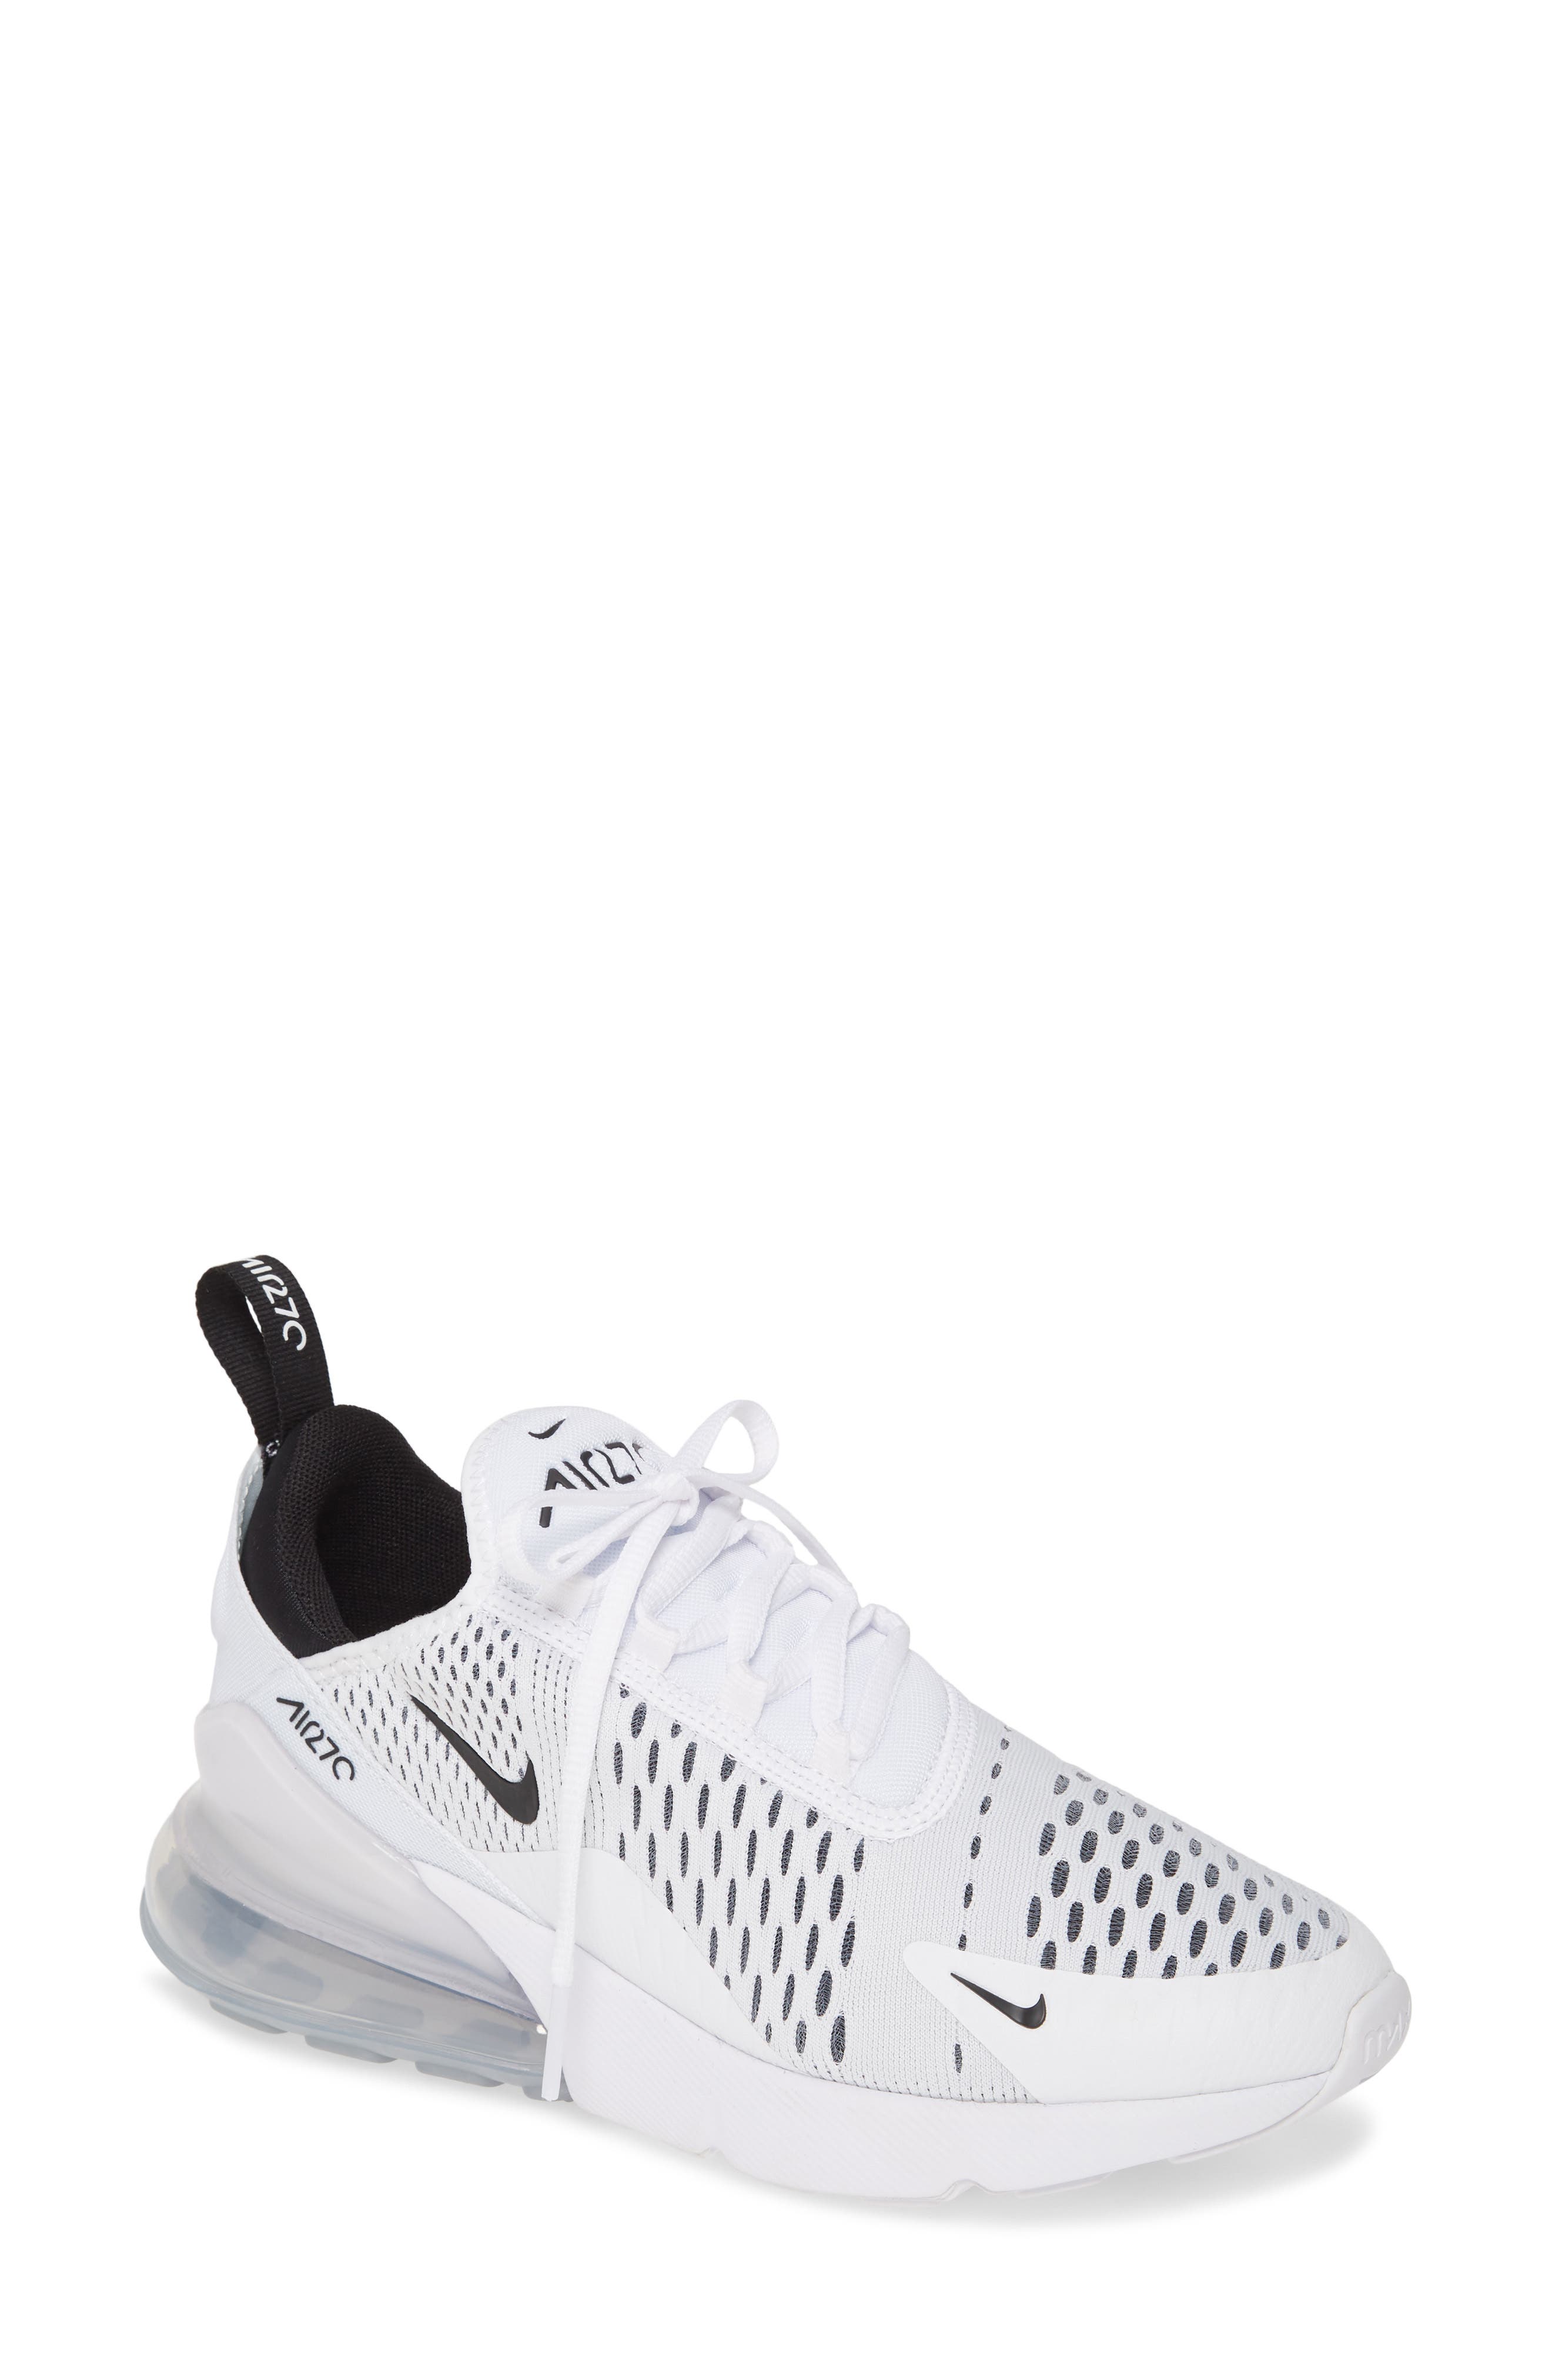 women's nike black and white shoes